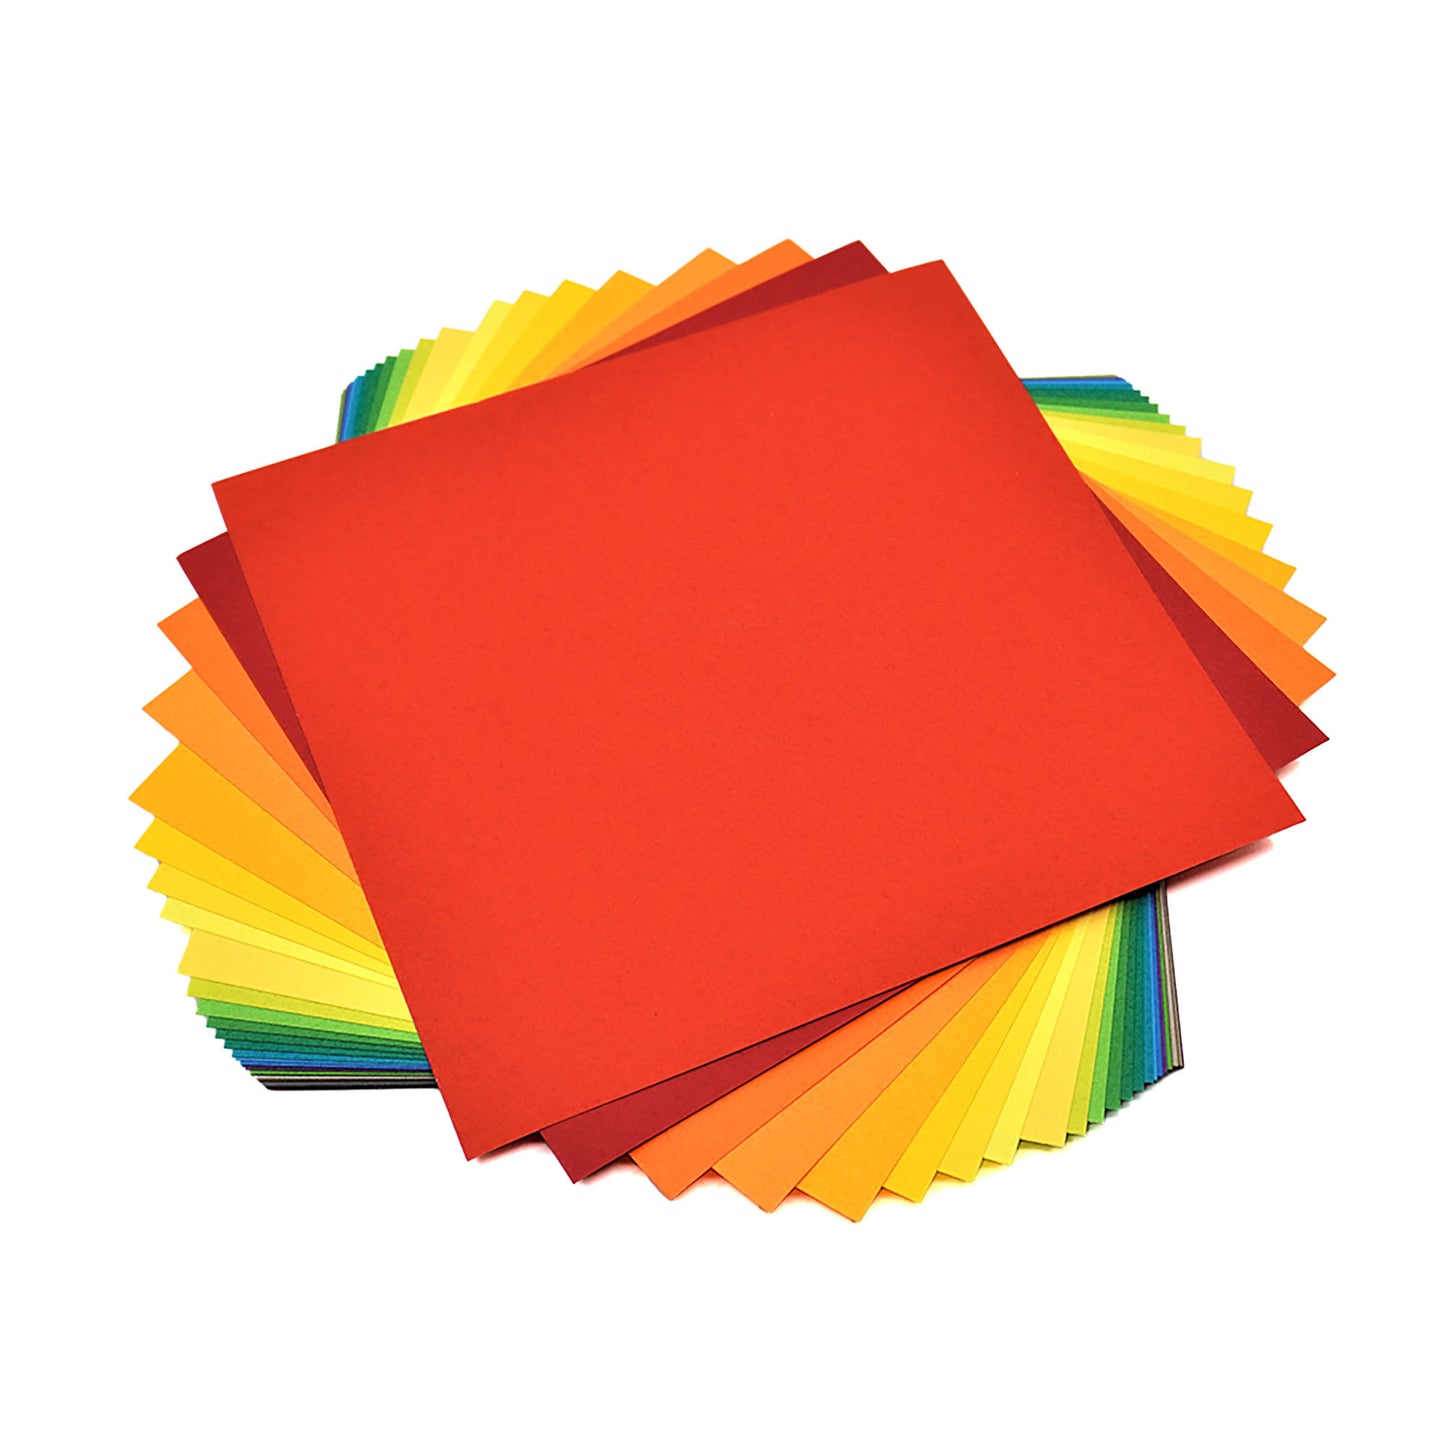 TANT Standard size 6 inch (15cm) Japanese Origami Paper, 50 Double Sided Sheets